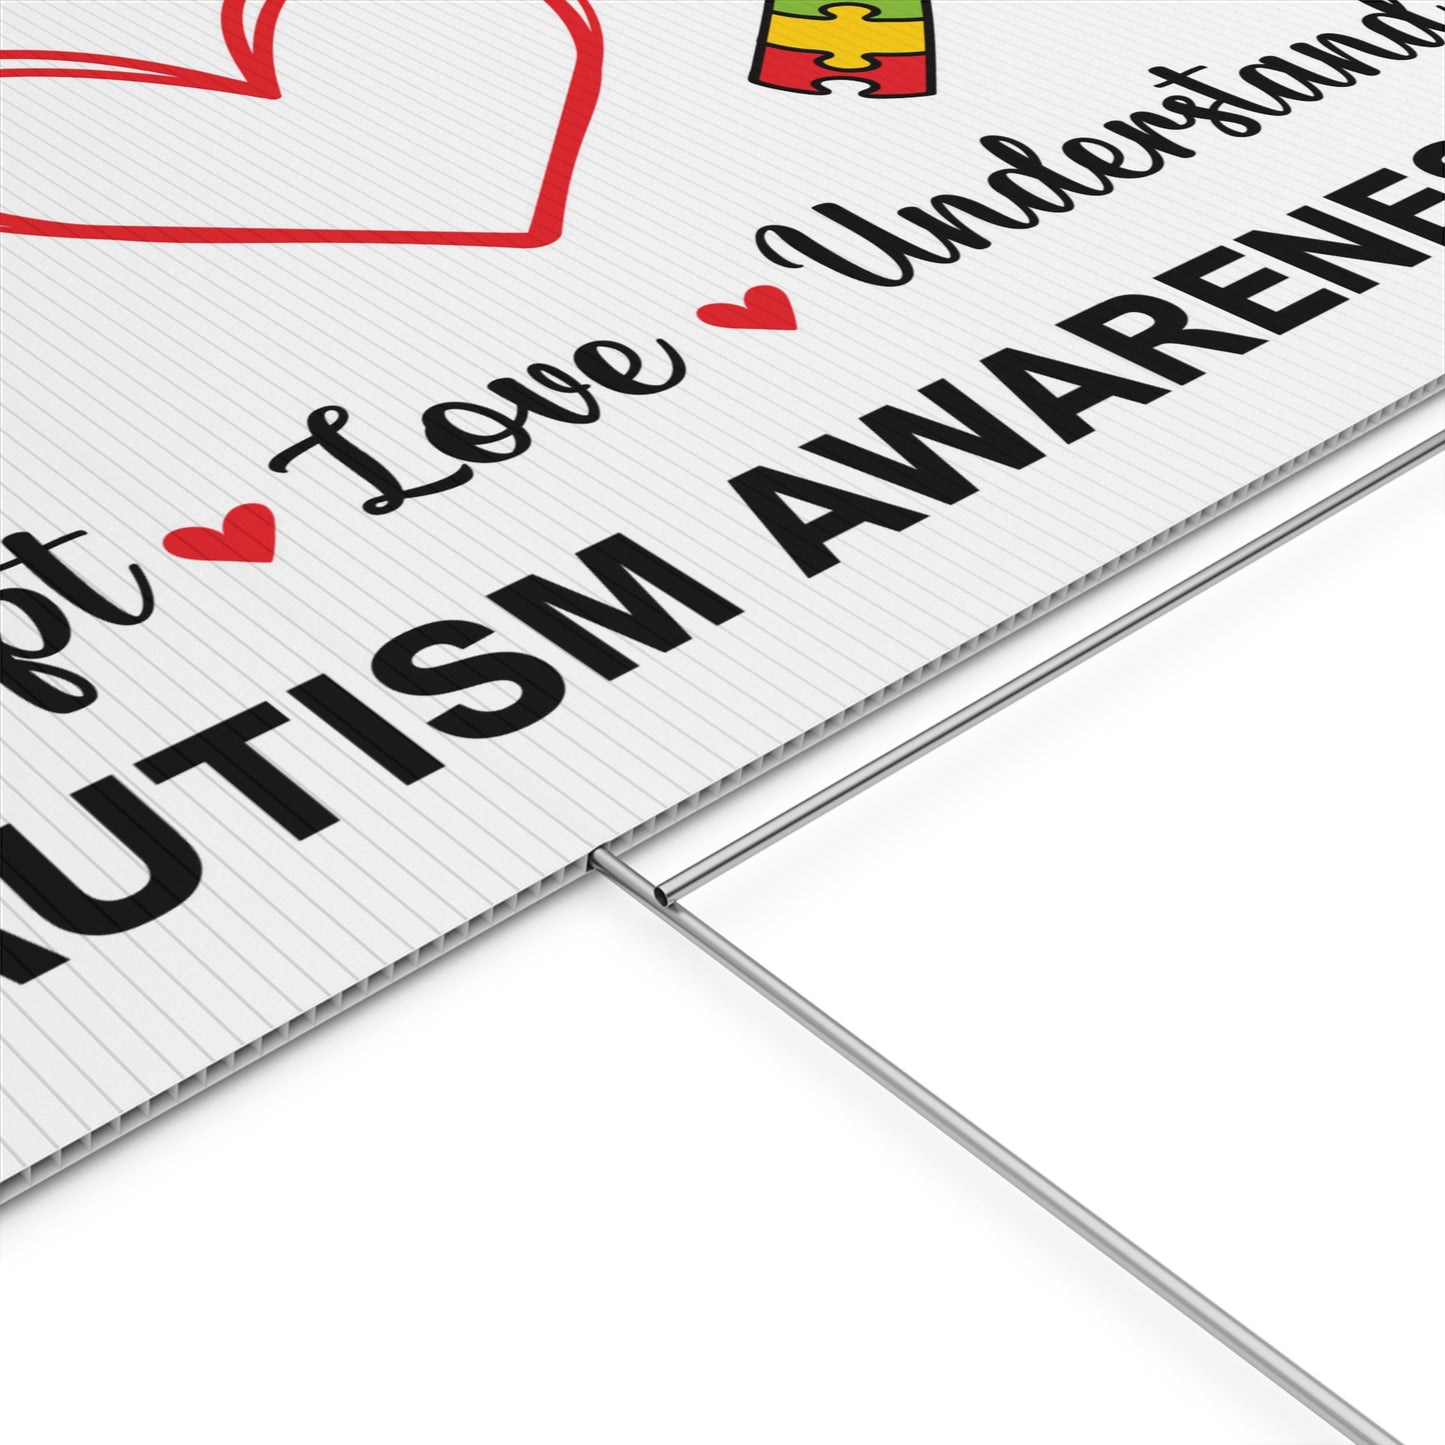 Autism Awareness Yard Sign, 18x12, 24x18, 36x24, Double Sided, H-Stake Included, v4